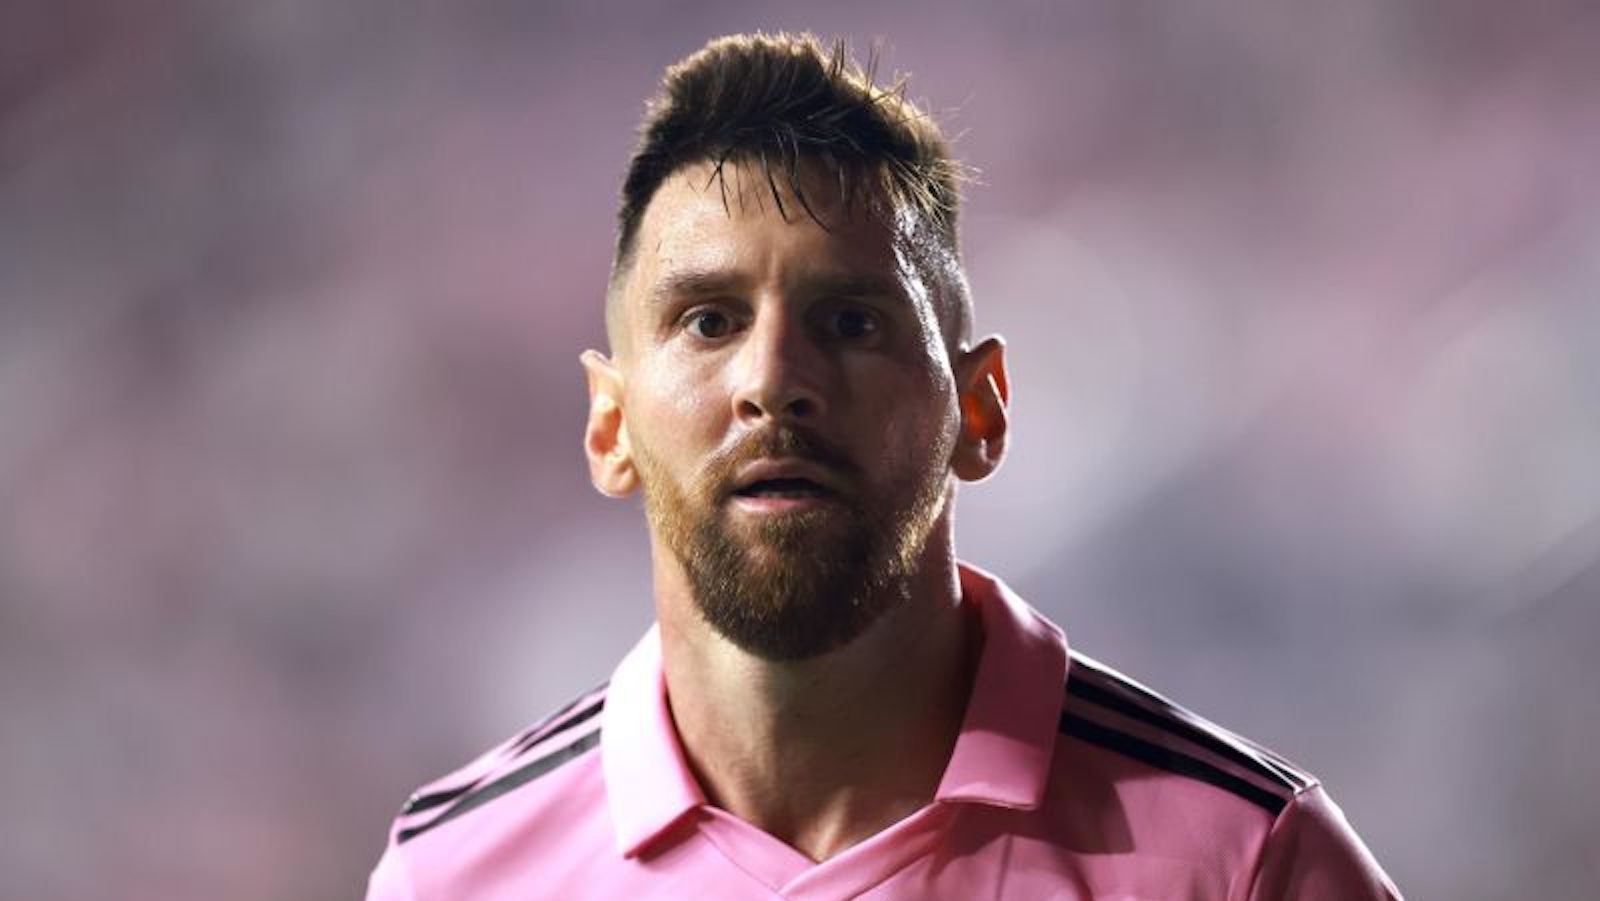 Even when Lionel Messi isn’t playing, he’s still the star of the show in MLS